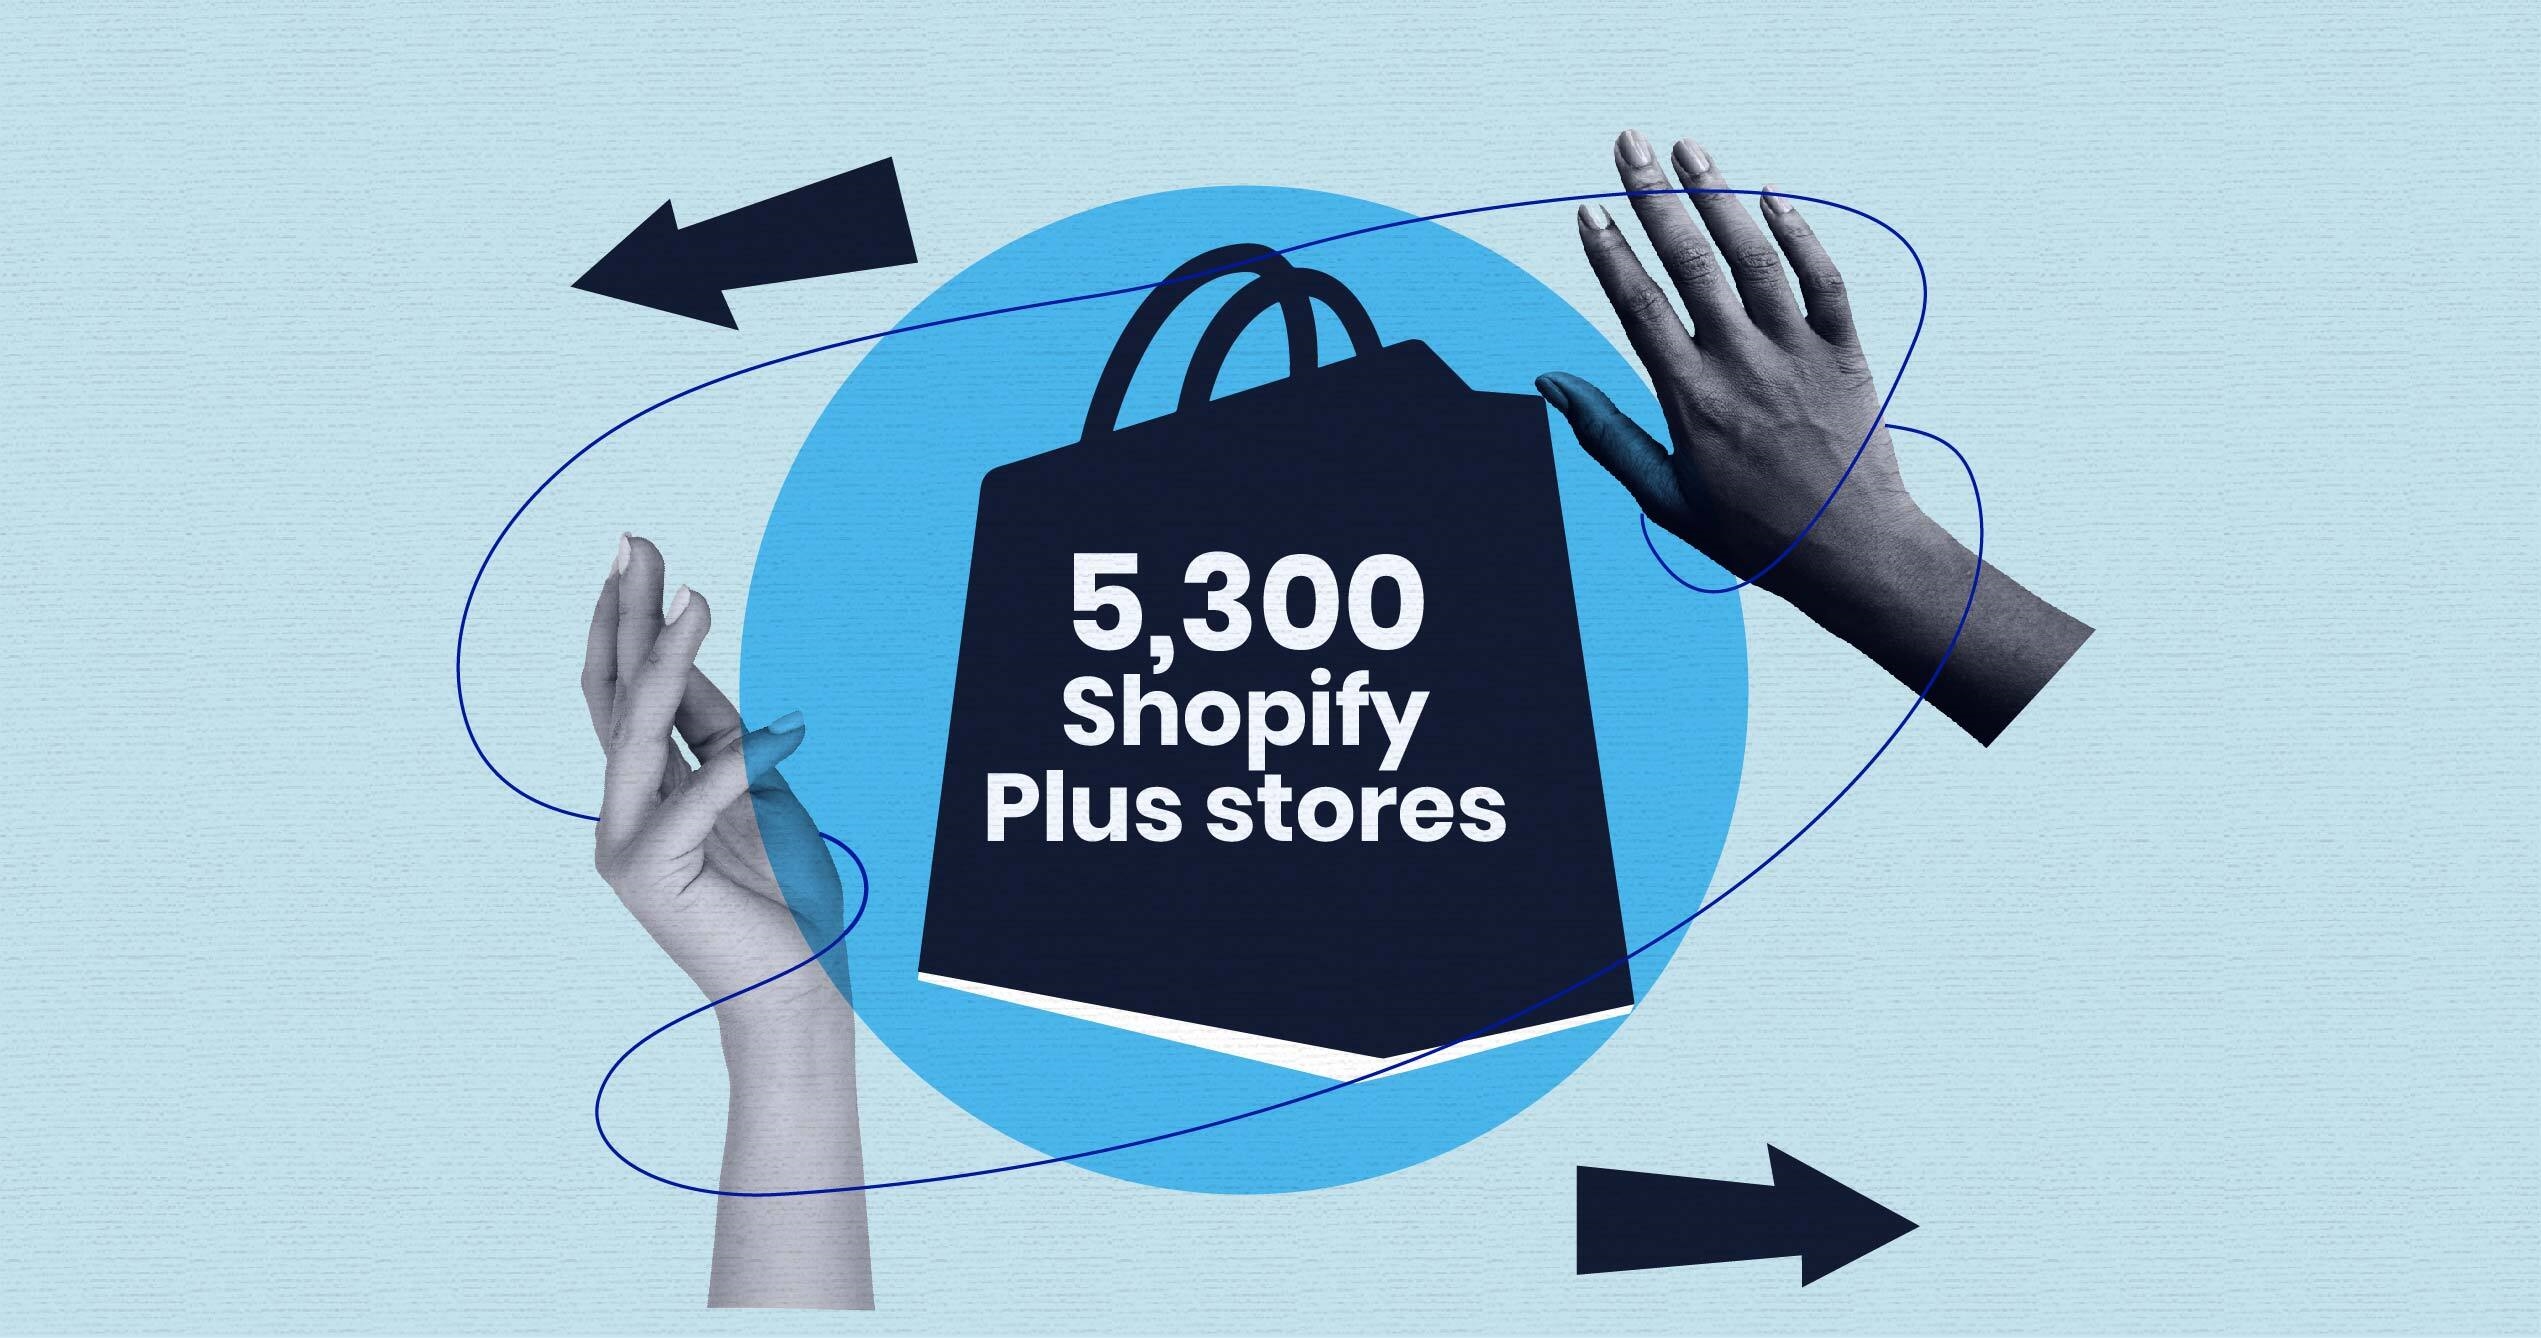 Shopify Stats 2021: Facts and Figures You Should Know About the eCommerce Behemoth | DeviceDaily.com